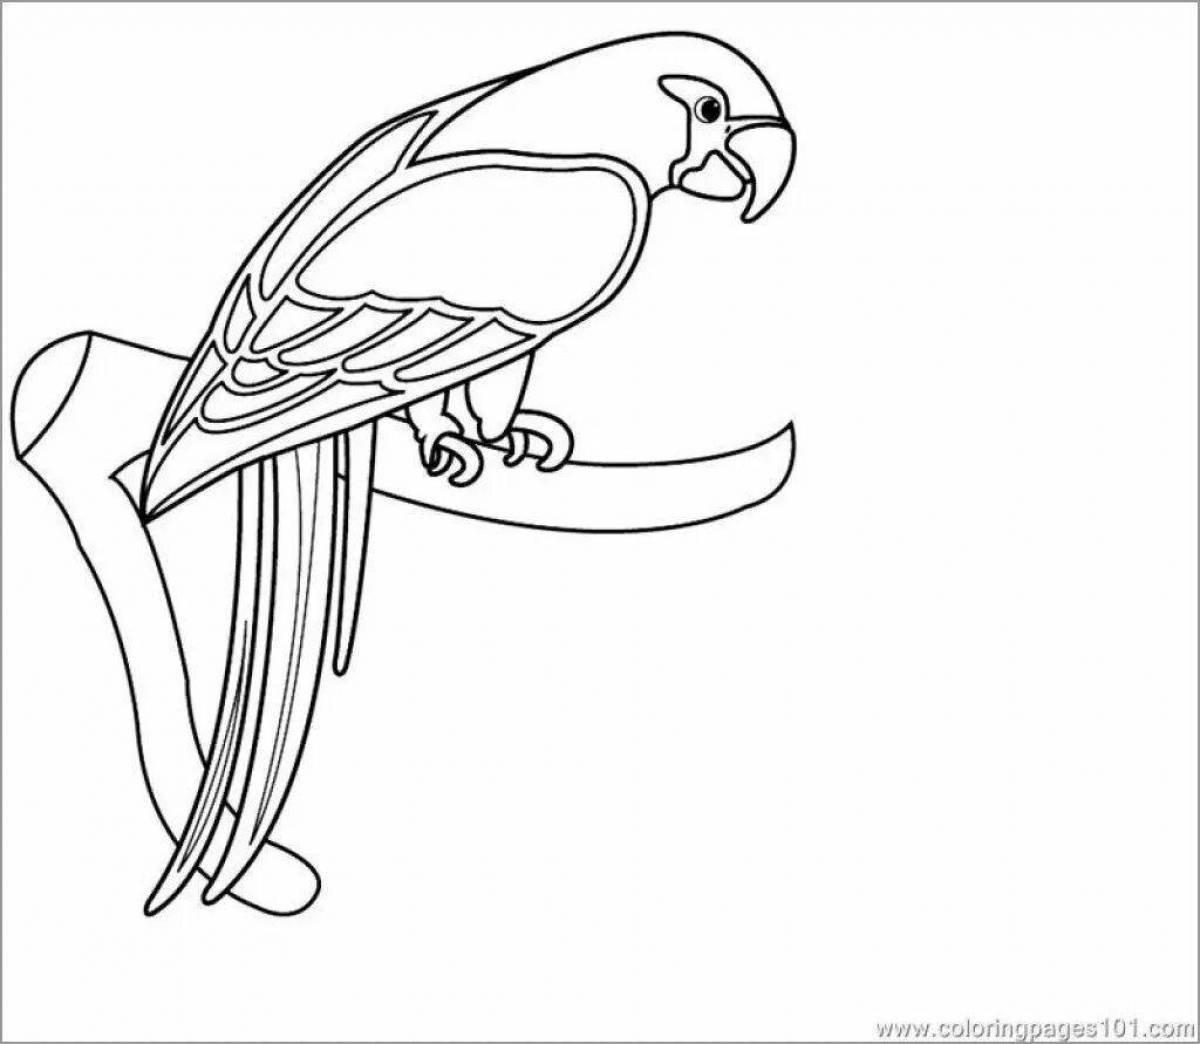 Attractive drawing of a parrot for children